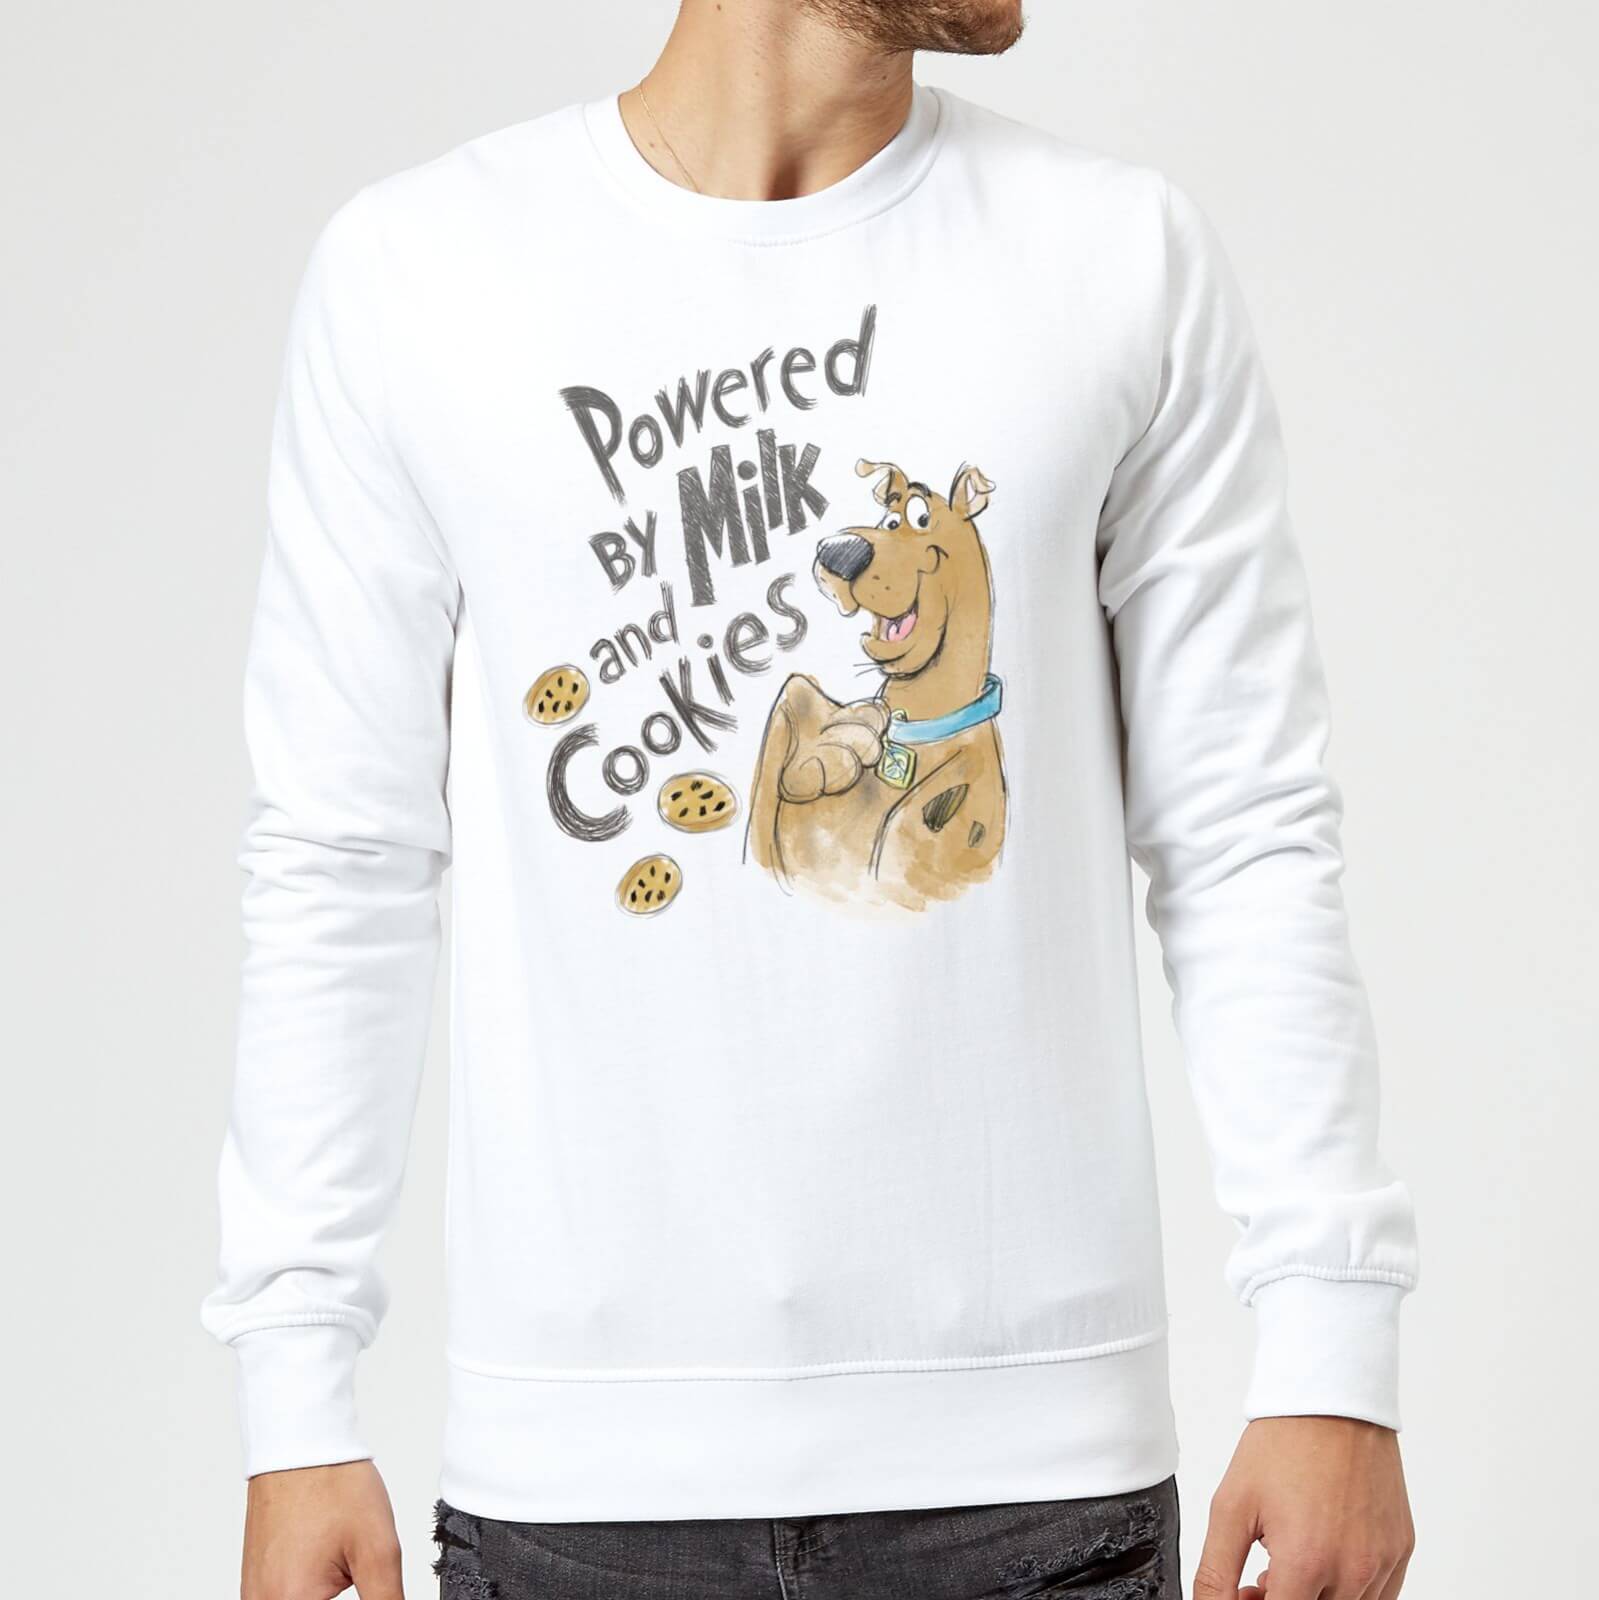 Scooby Doo Powered By Milk And Cookies Sweatshirt - White - S